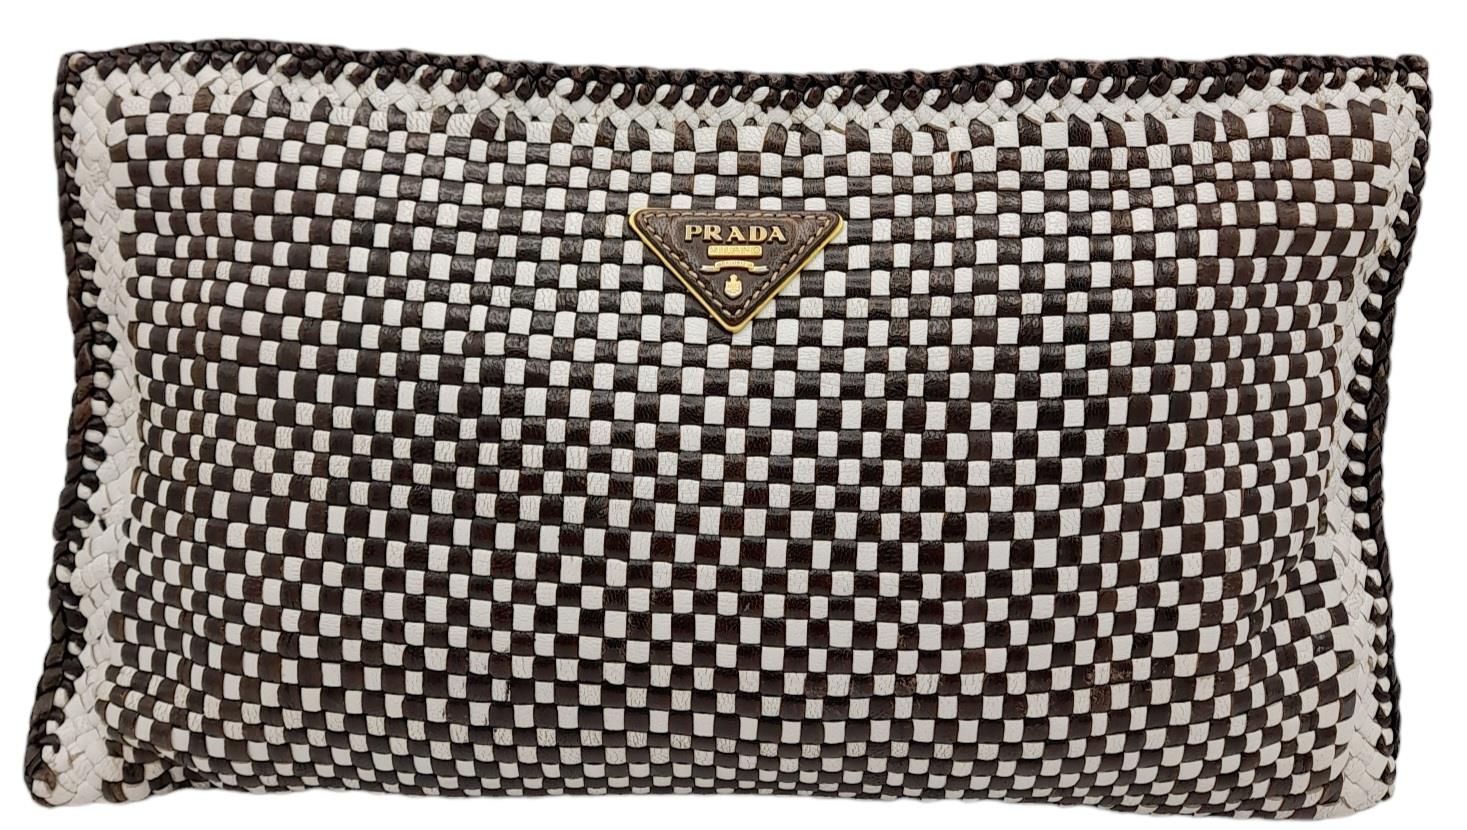 A Prada Black and White 'Madras' Clutch Bag. Woven leather exterior with gold-toned hardware and